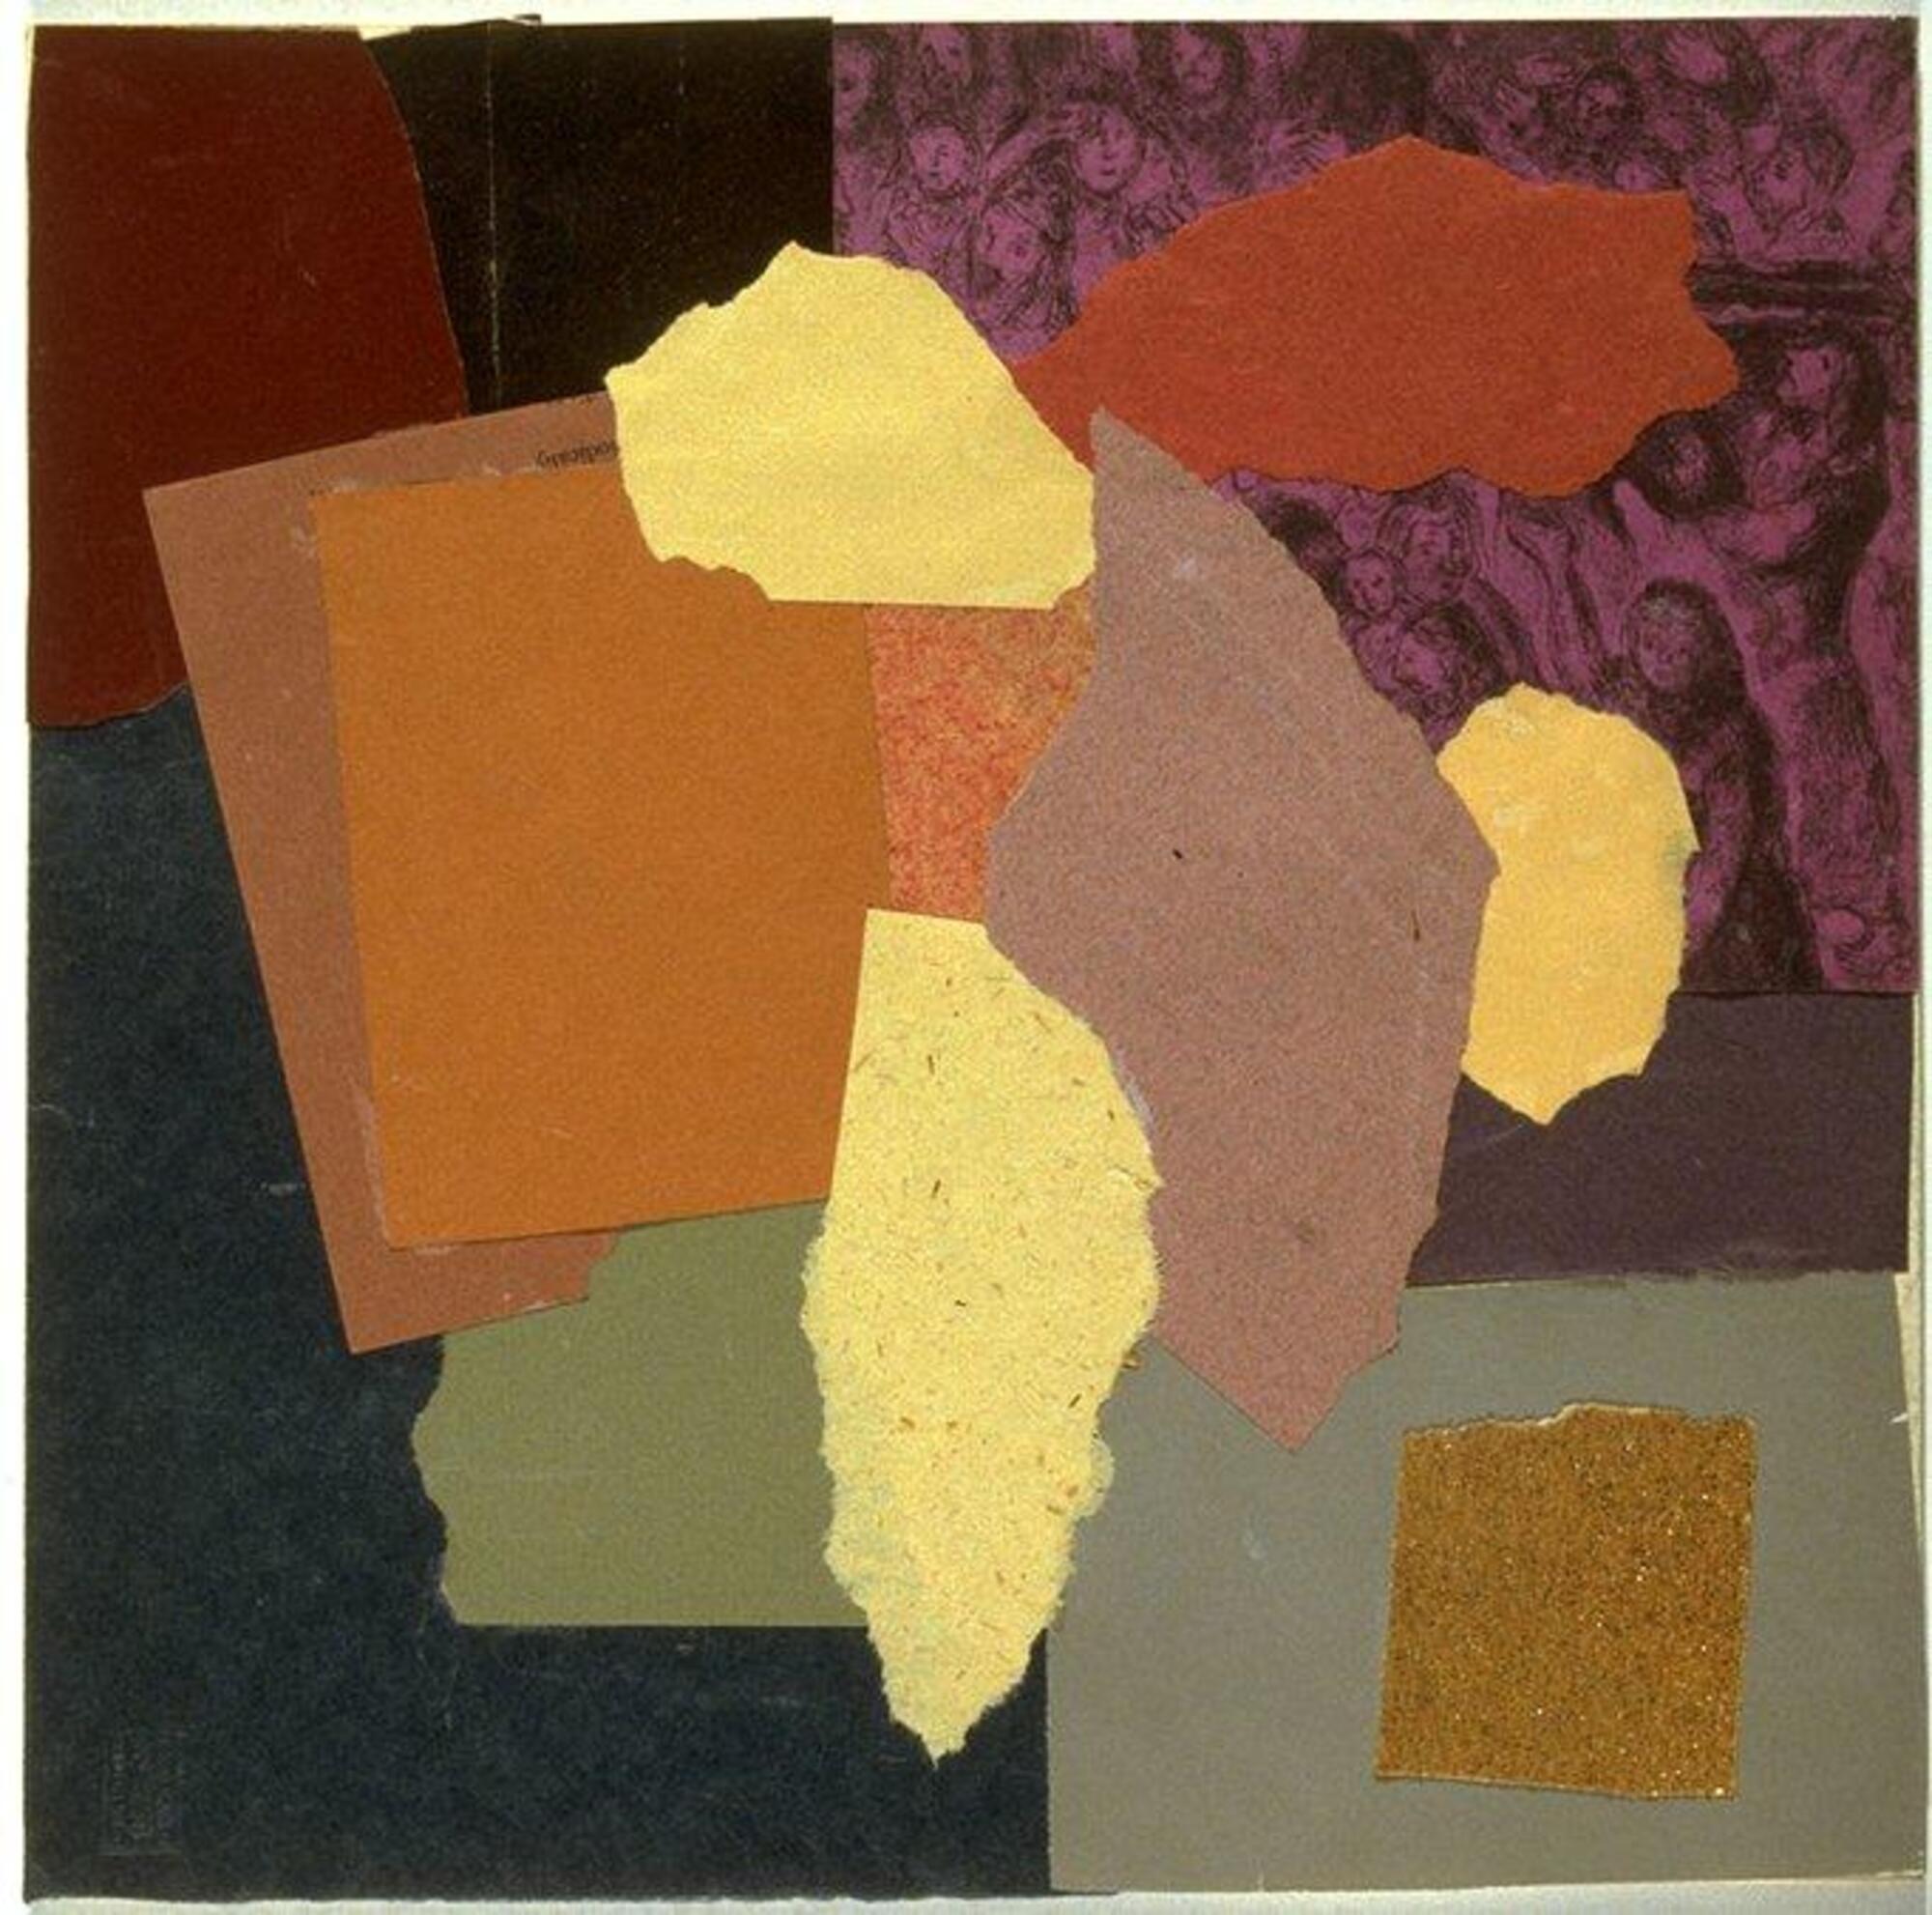 A collage composed of different colored pieces of sandpaper of different grades or textures, construction paper, printed papers, and a piece of embossed leather. Most of the sandpaper pieces are in an overlapping group in the center of the piece. In the viewer&#39;s upper right there is a purple piece of paper printed with a throng of human figures.